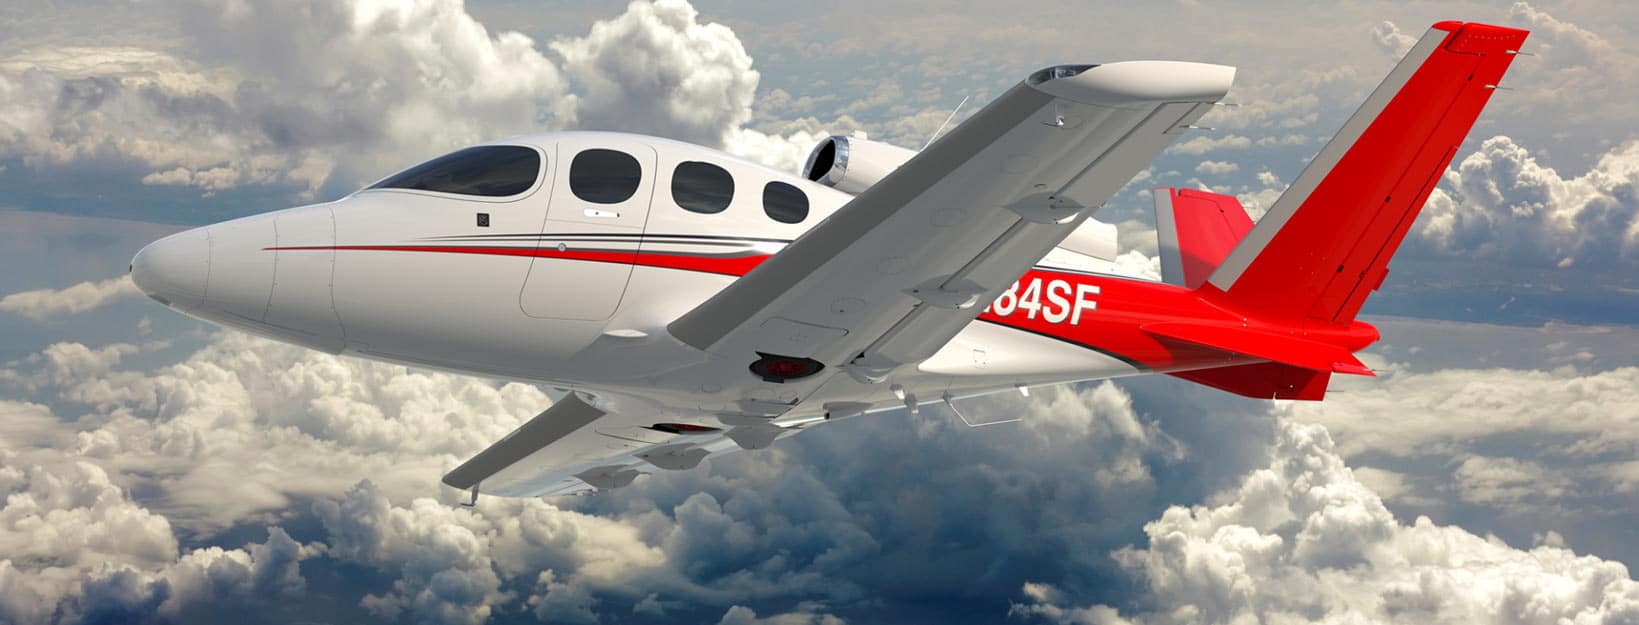 The Cirrus Vision SF50 Jet in flight